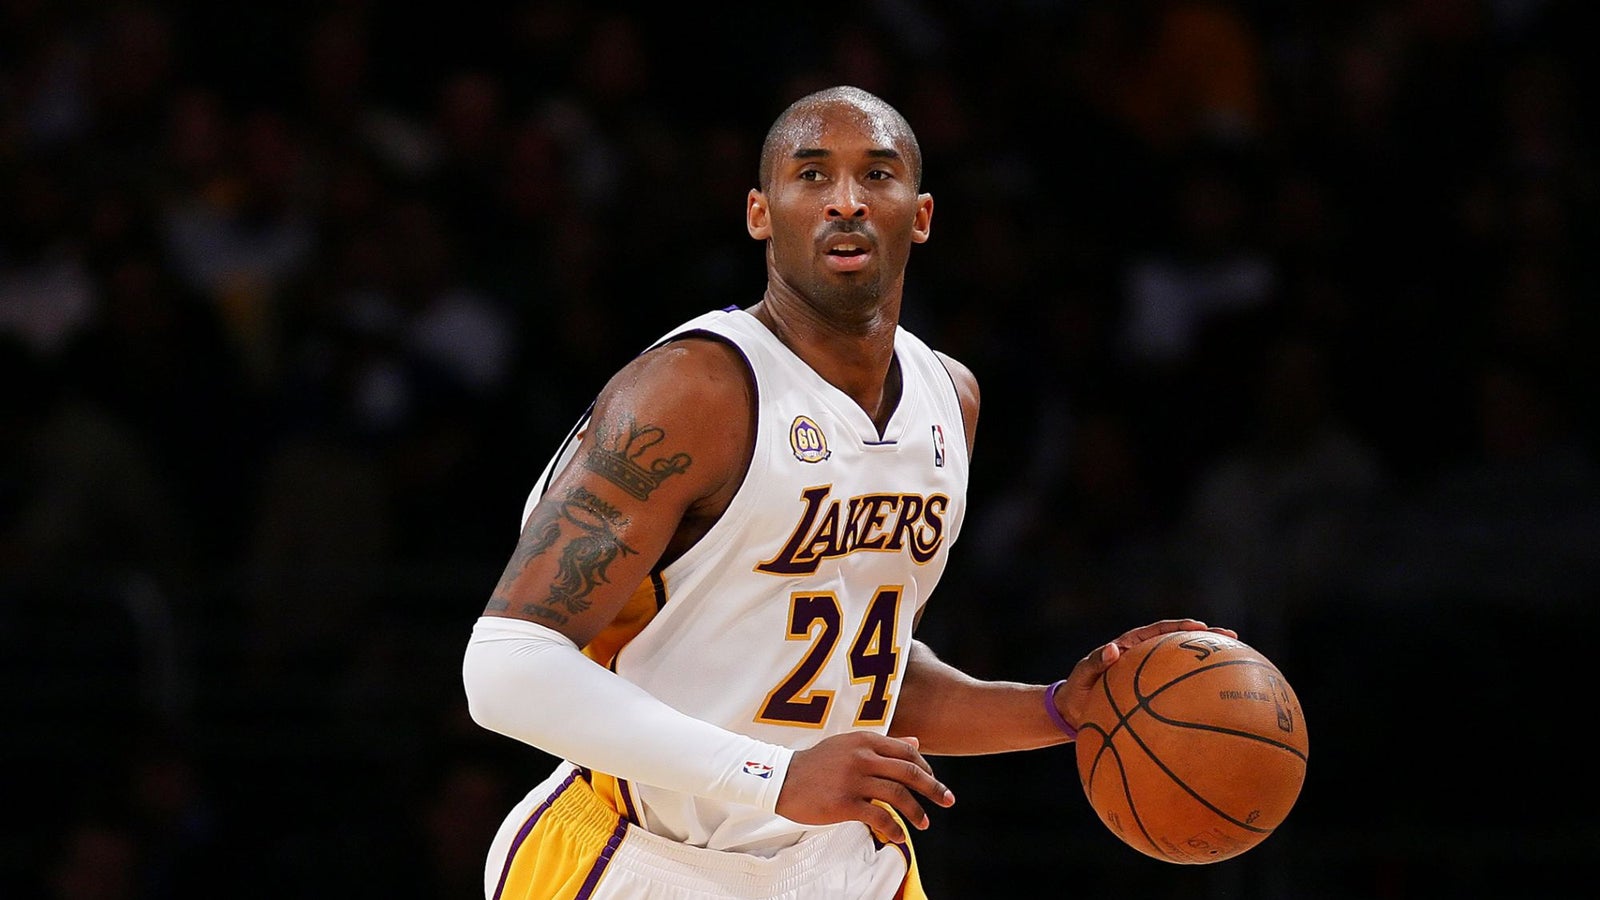 6 Kobe Bryant quotes about leadership and competition